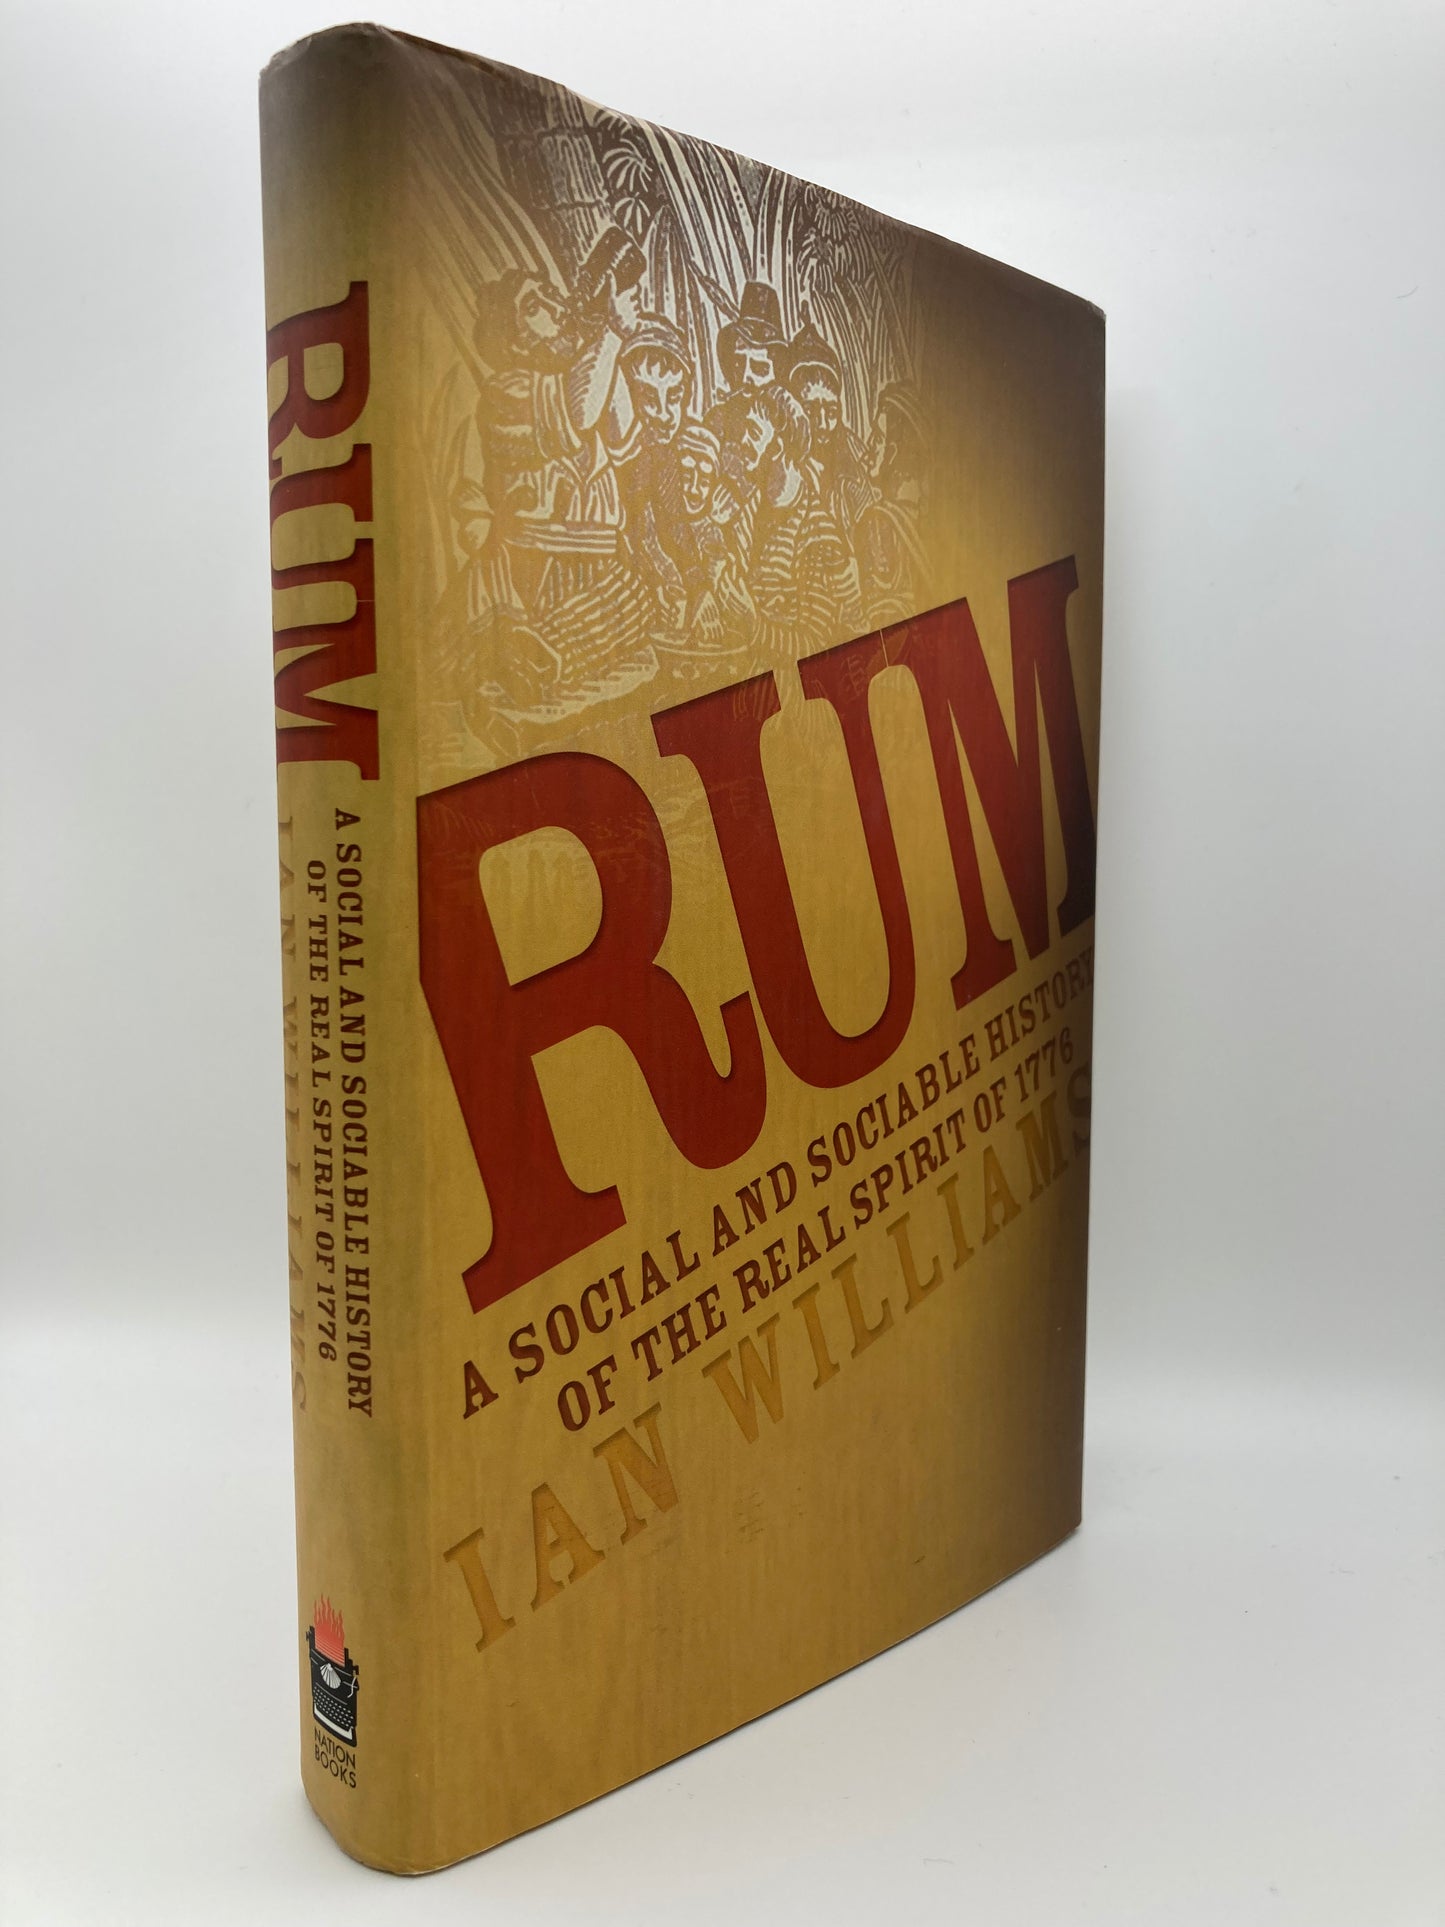 Rum: A Social and Sociable History of the Real Spirit of 1776